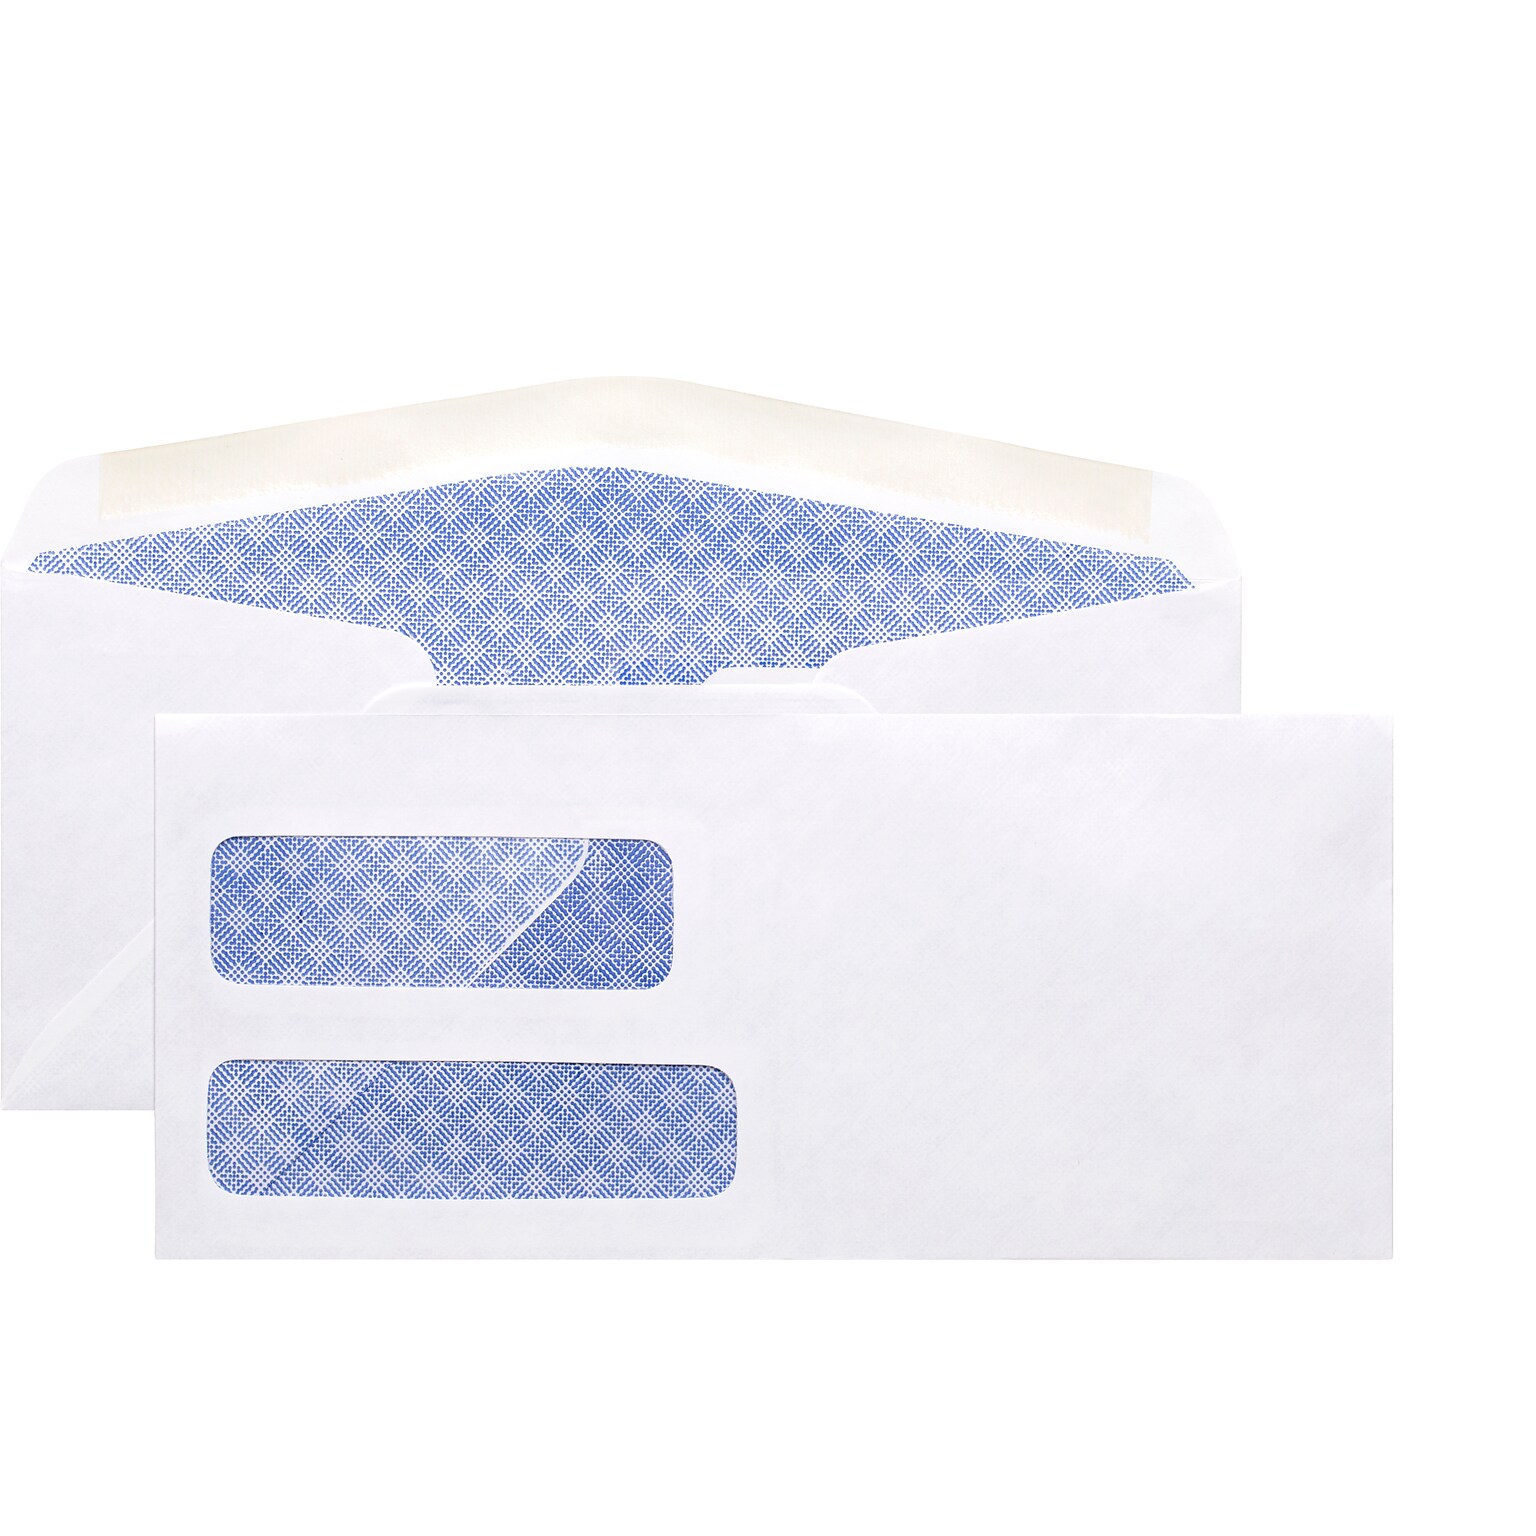 Quill Brand Security Tinted #10 Double Window Envelopes, 4 1/8 x 9 1/2, White Wove, 500/Box (3016430)